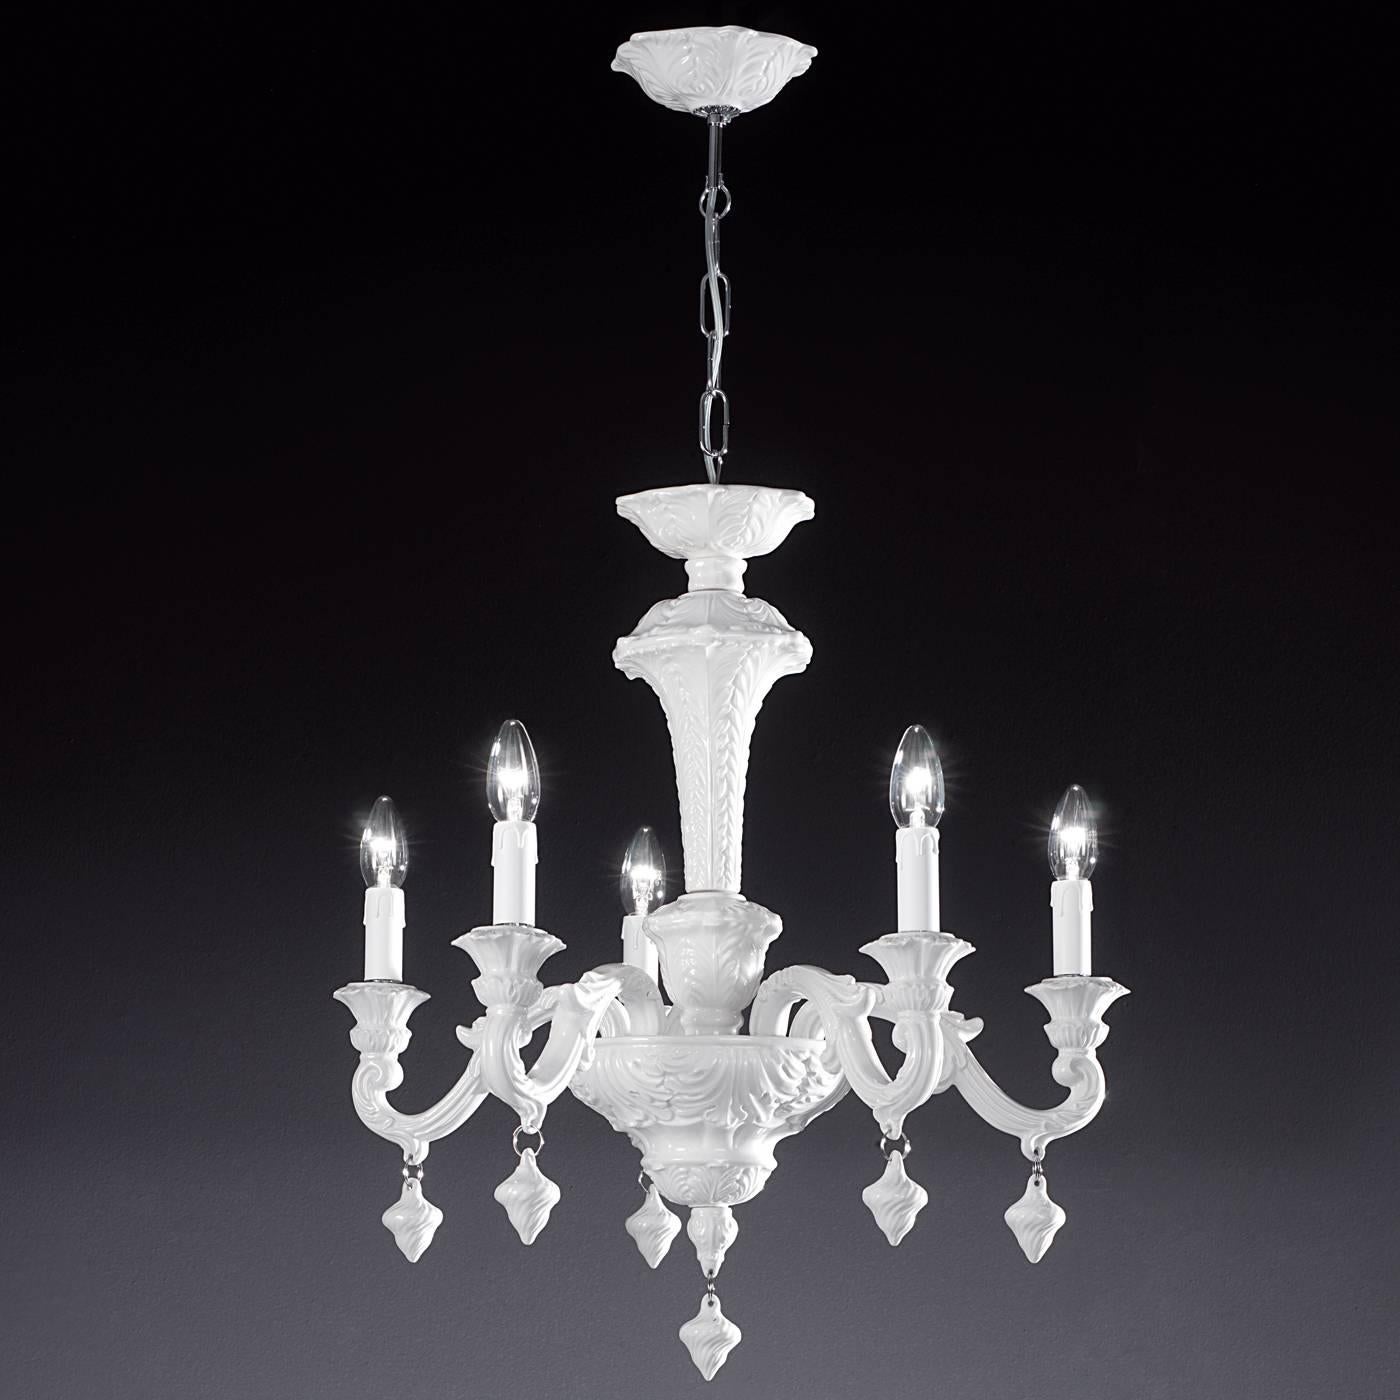 The Classic and refined Silhouette of this ceramic chandelier makes it a true beauty to behold. The extremely detailed and intricate surface decorations in bas-relief feature reproductions of acanthus leaves, an icon of Classic Italian design. This